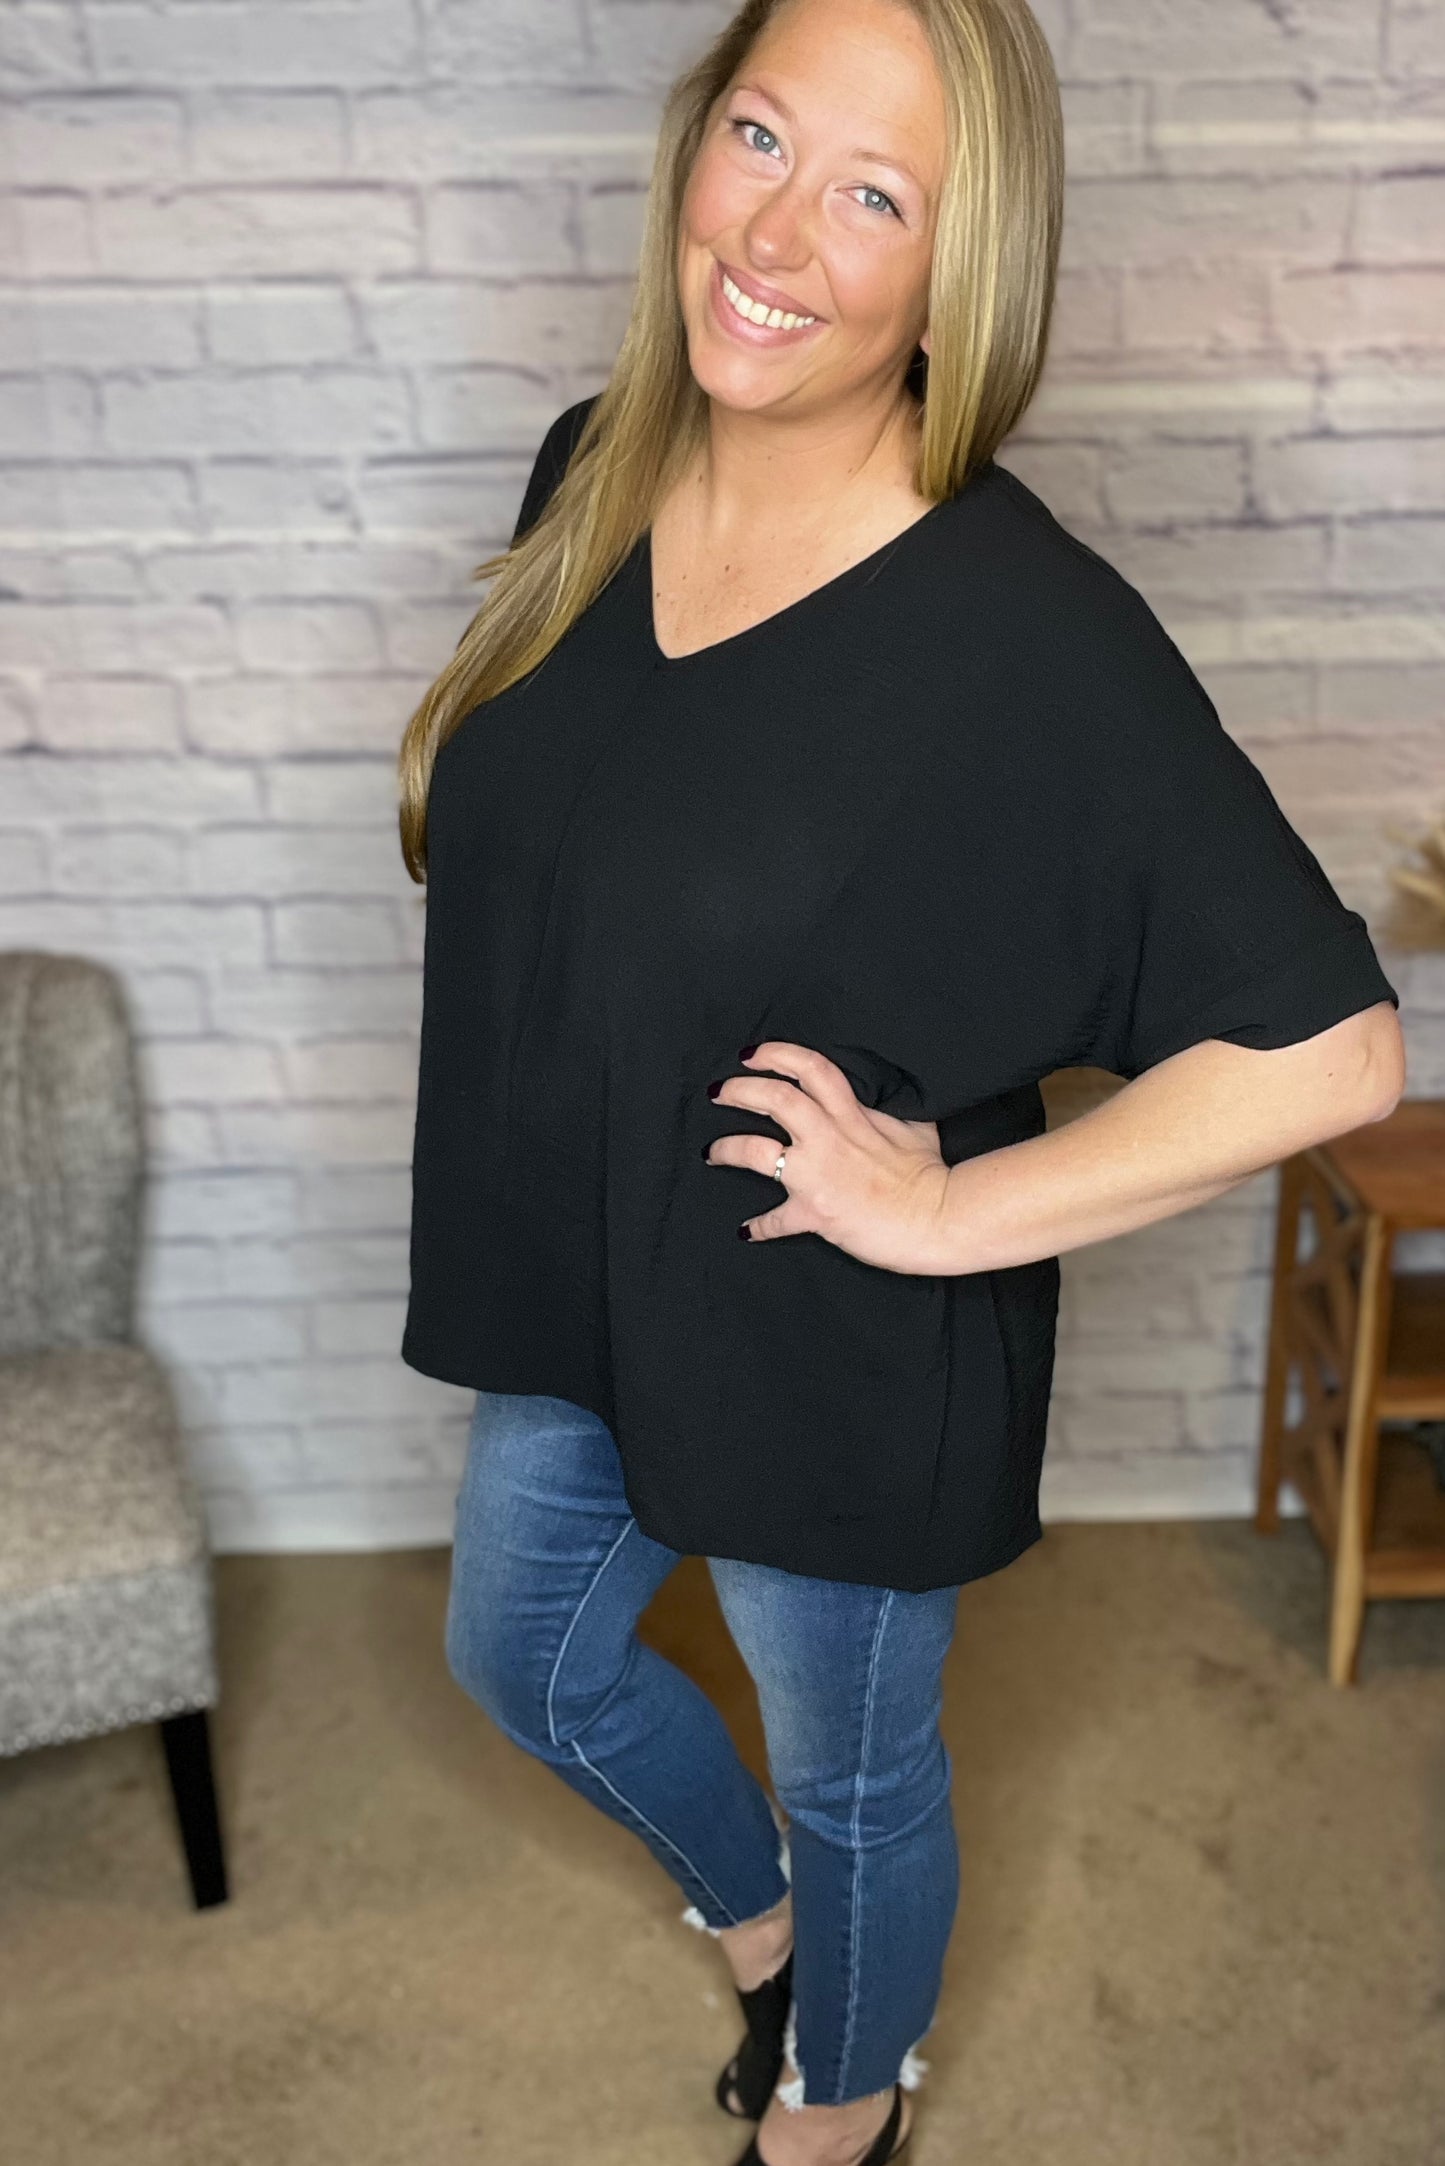 Woven Airflow V-Neck Dolman Sleeve Top - 3 Colors!